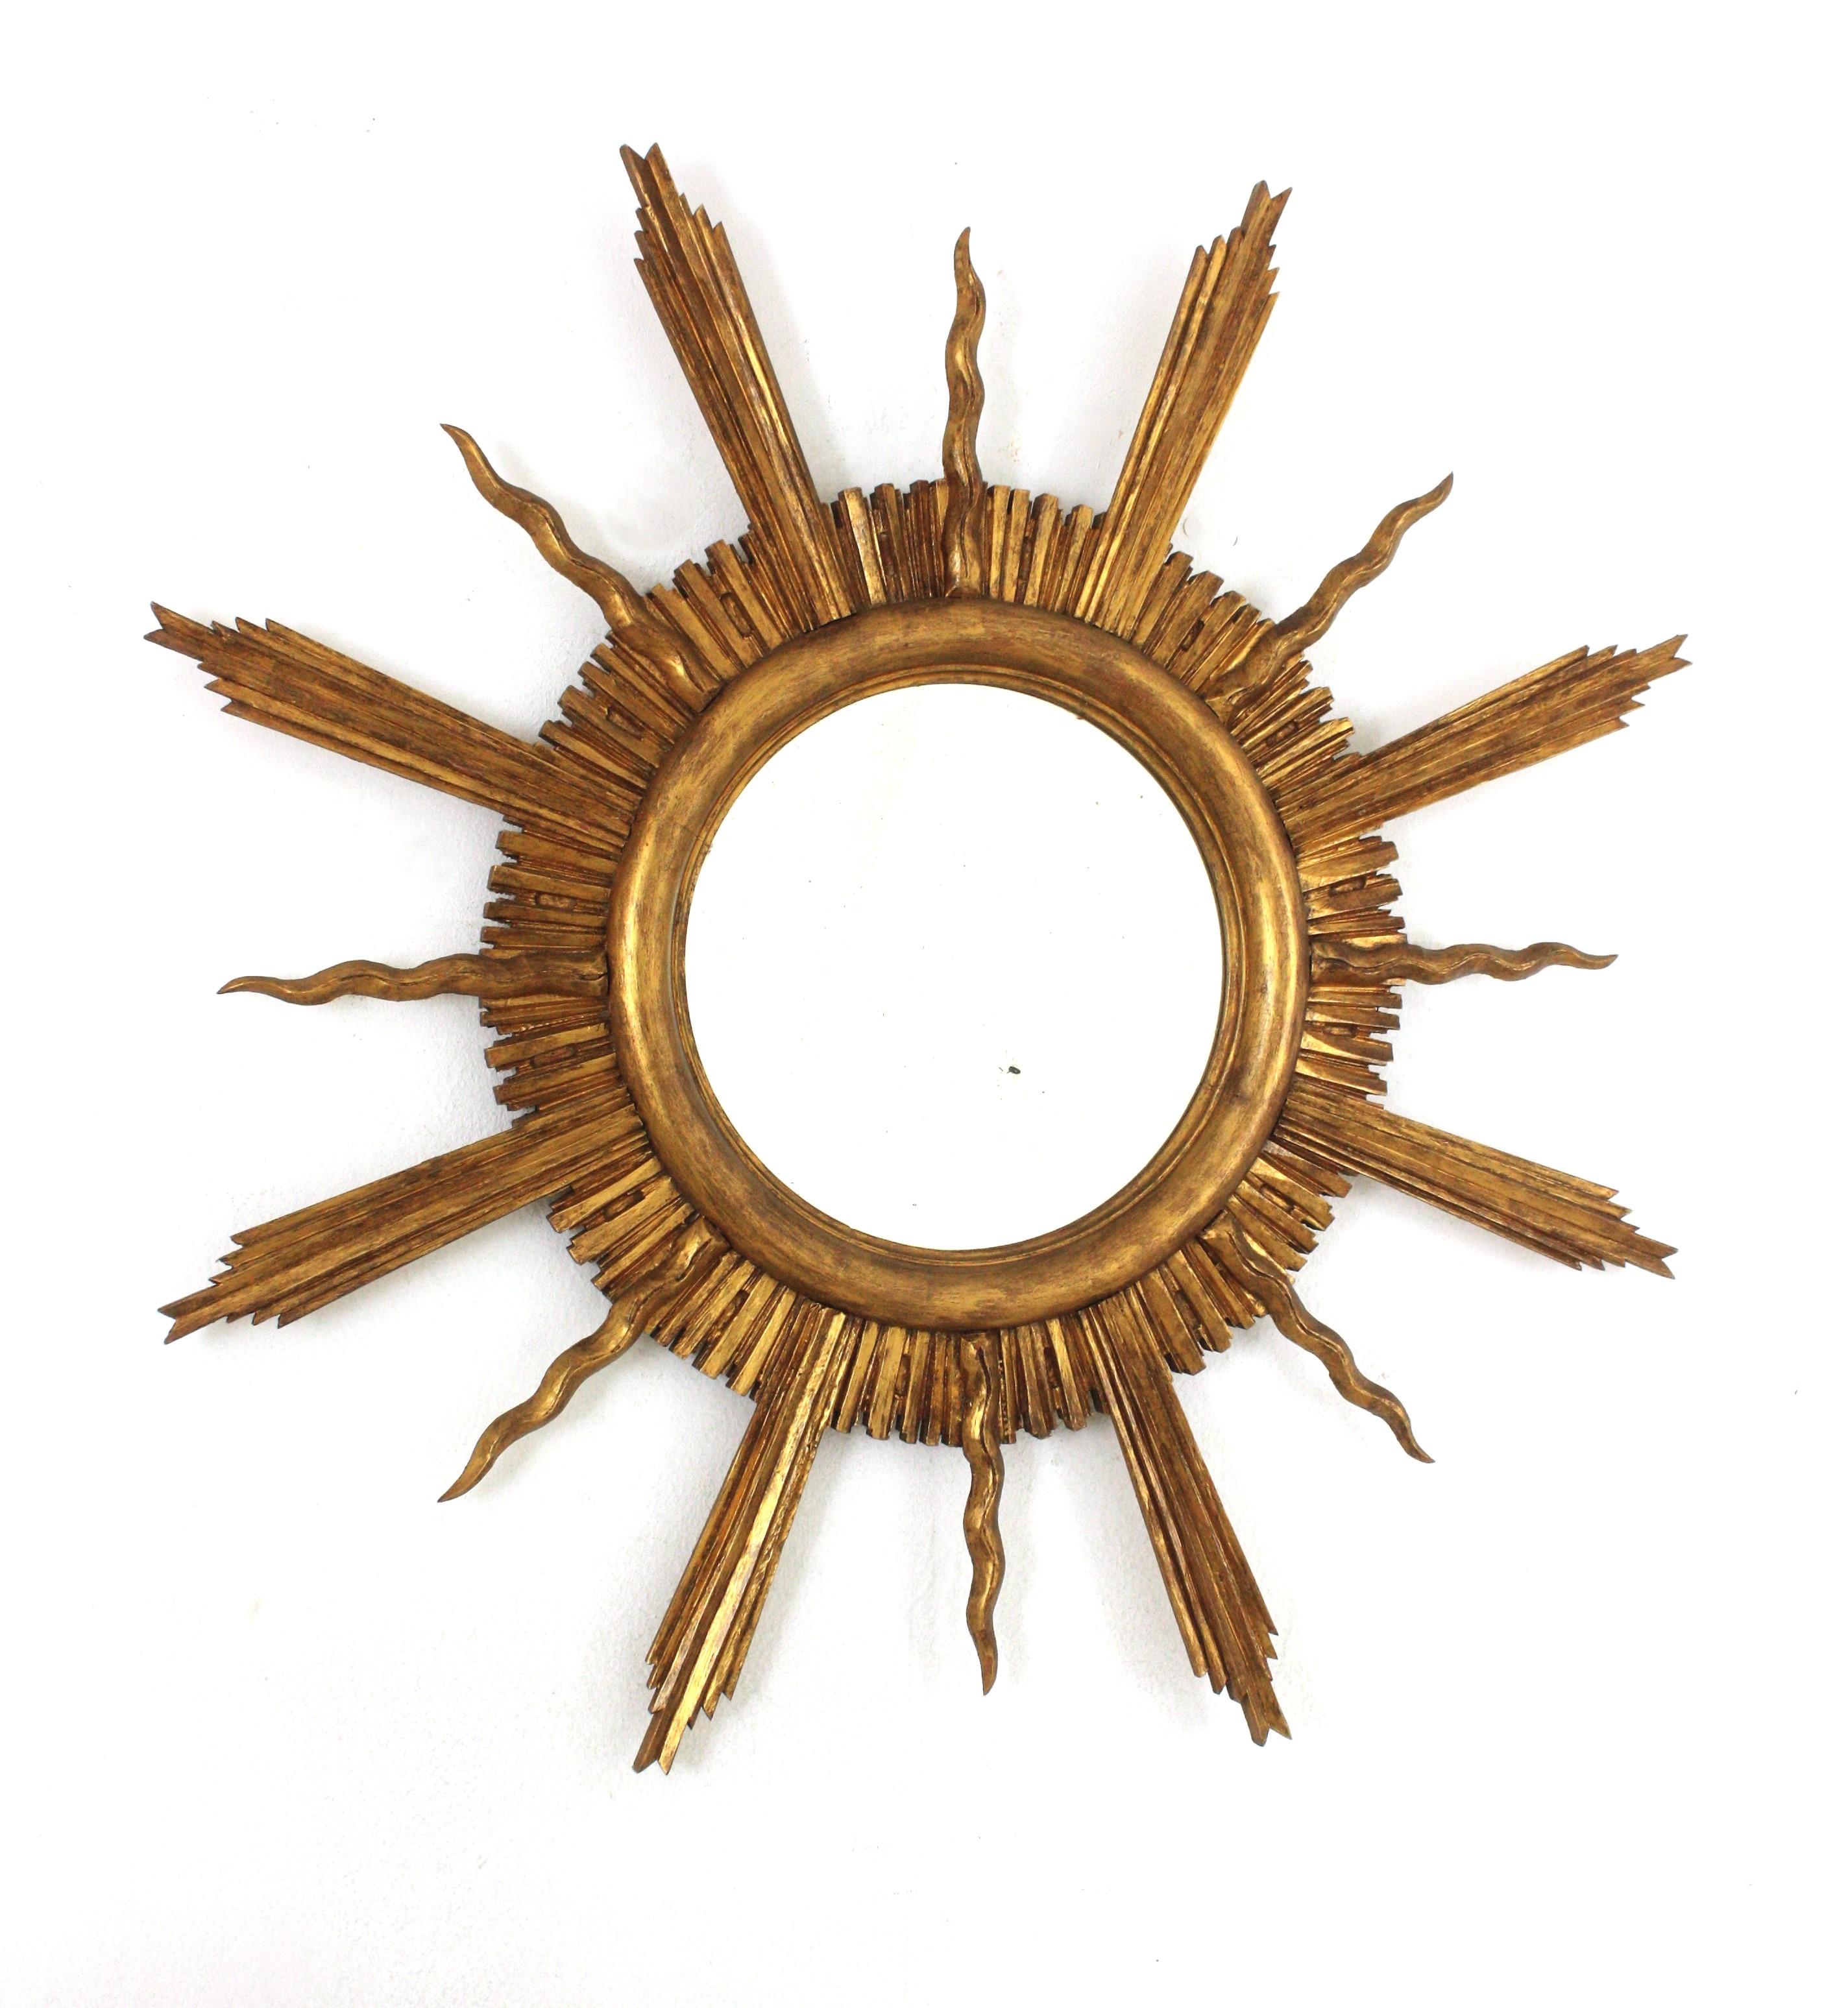 Outstanding carved giltwood sunburst starburst mirror, France, 1930s-1940s.
Large gilded sunburst mirror with design reminiscences in the manner of Gilbert Poillerat.
French Modern Neoclassical with Baroque style accents.
This sunburst mirror